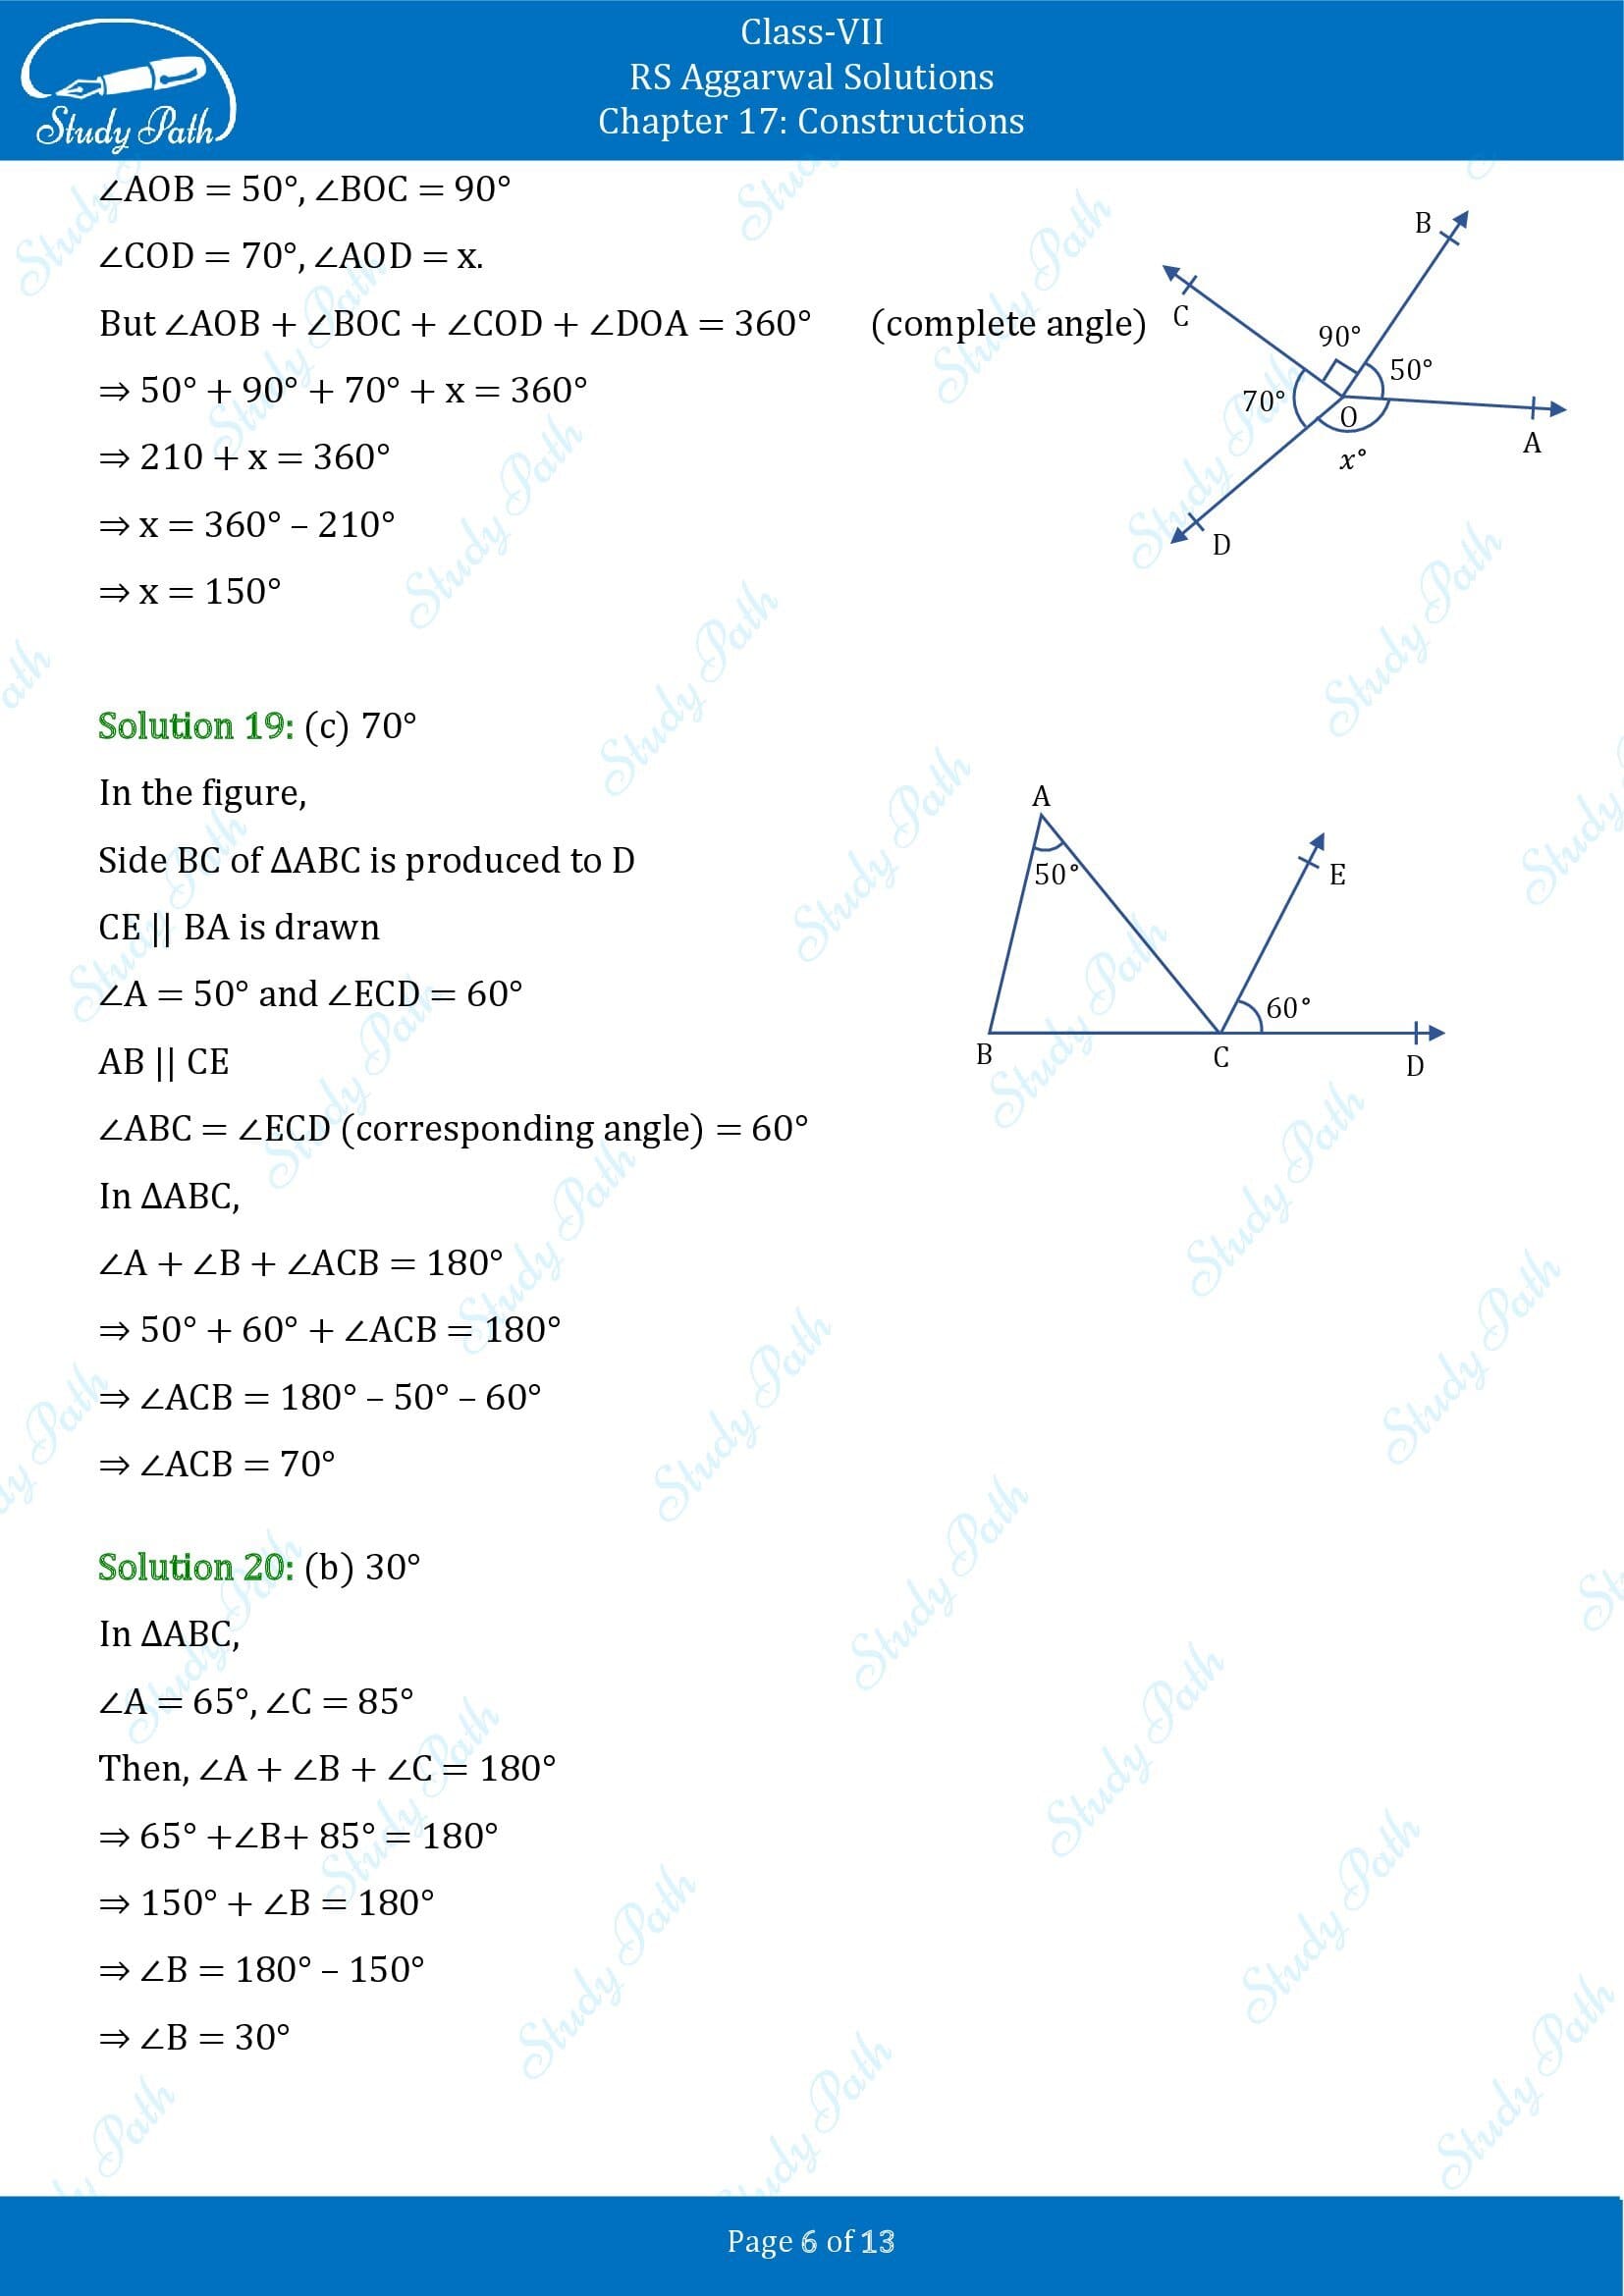 RS Aggarwal Solutions Class 7 Chapter 17 Constructions Exercise 17CMCQ 00006